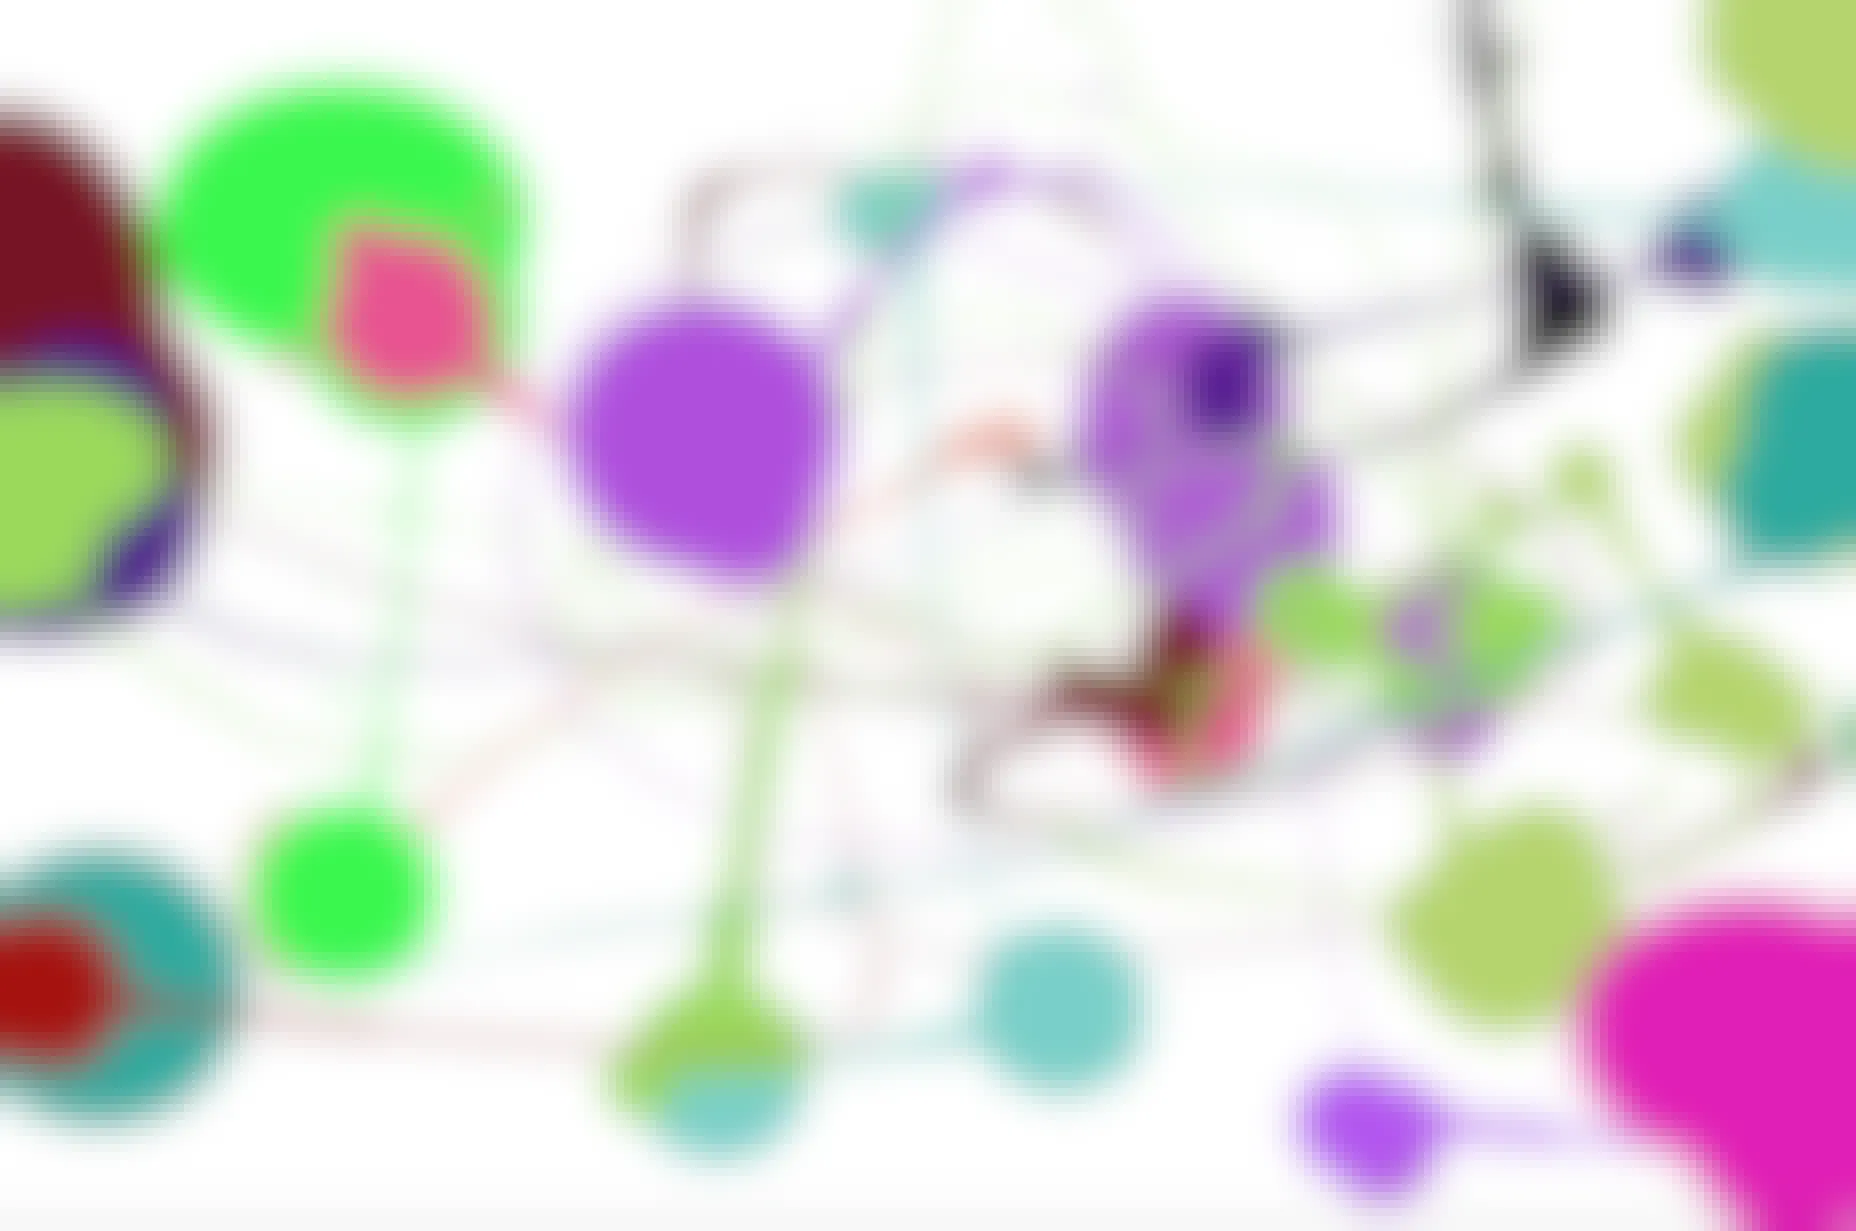 A screenshot of the JacksonPollock.org webpage with an abstract painting art game for children.